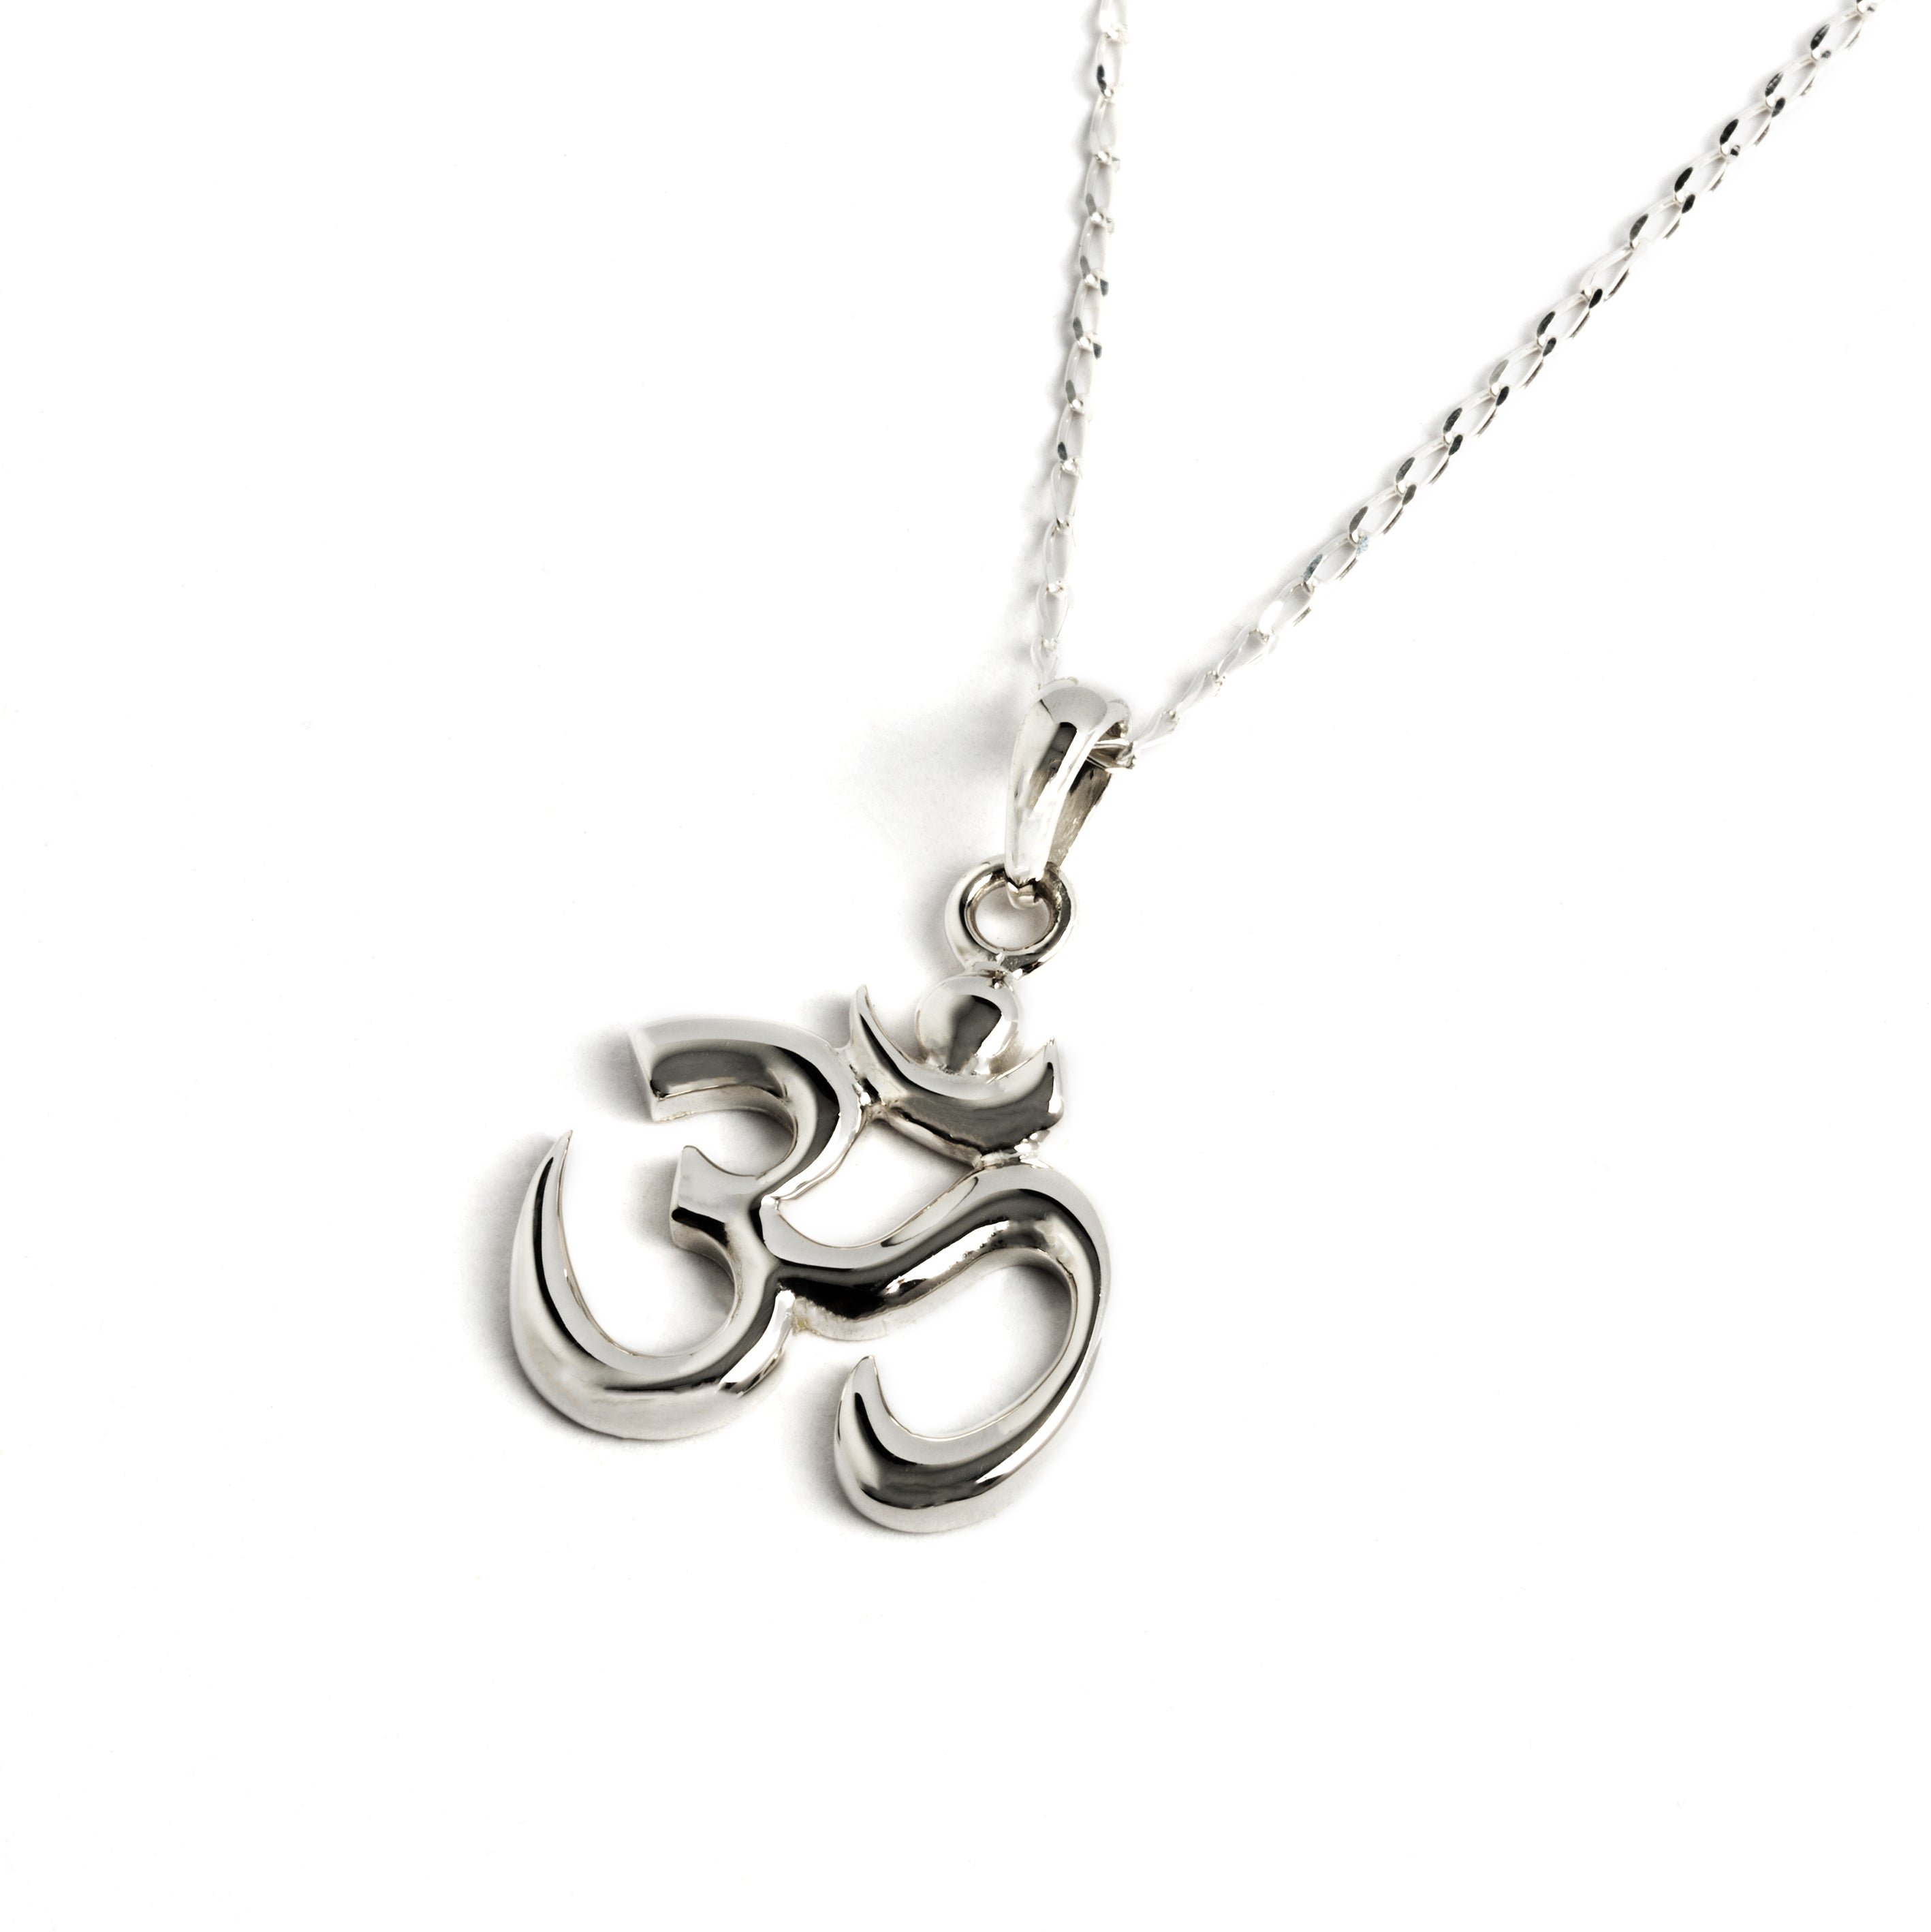 Silver Om charm necklace right side view